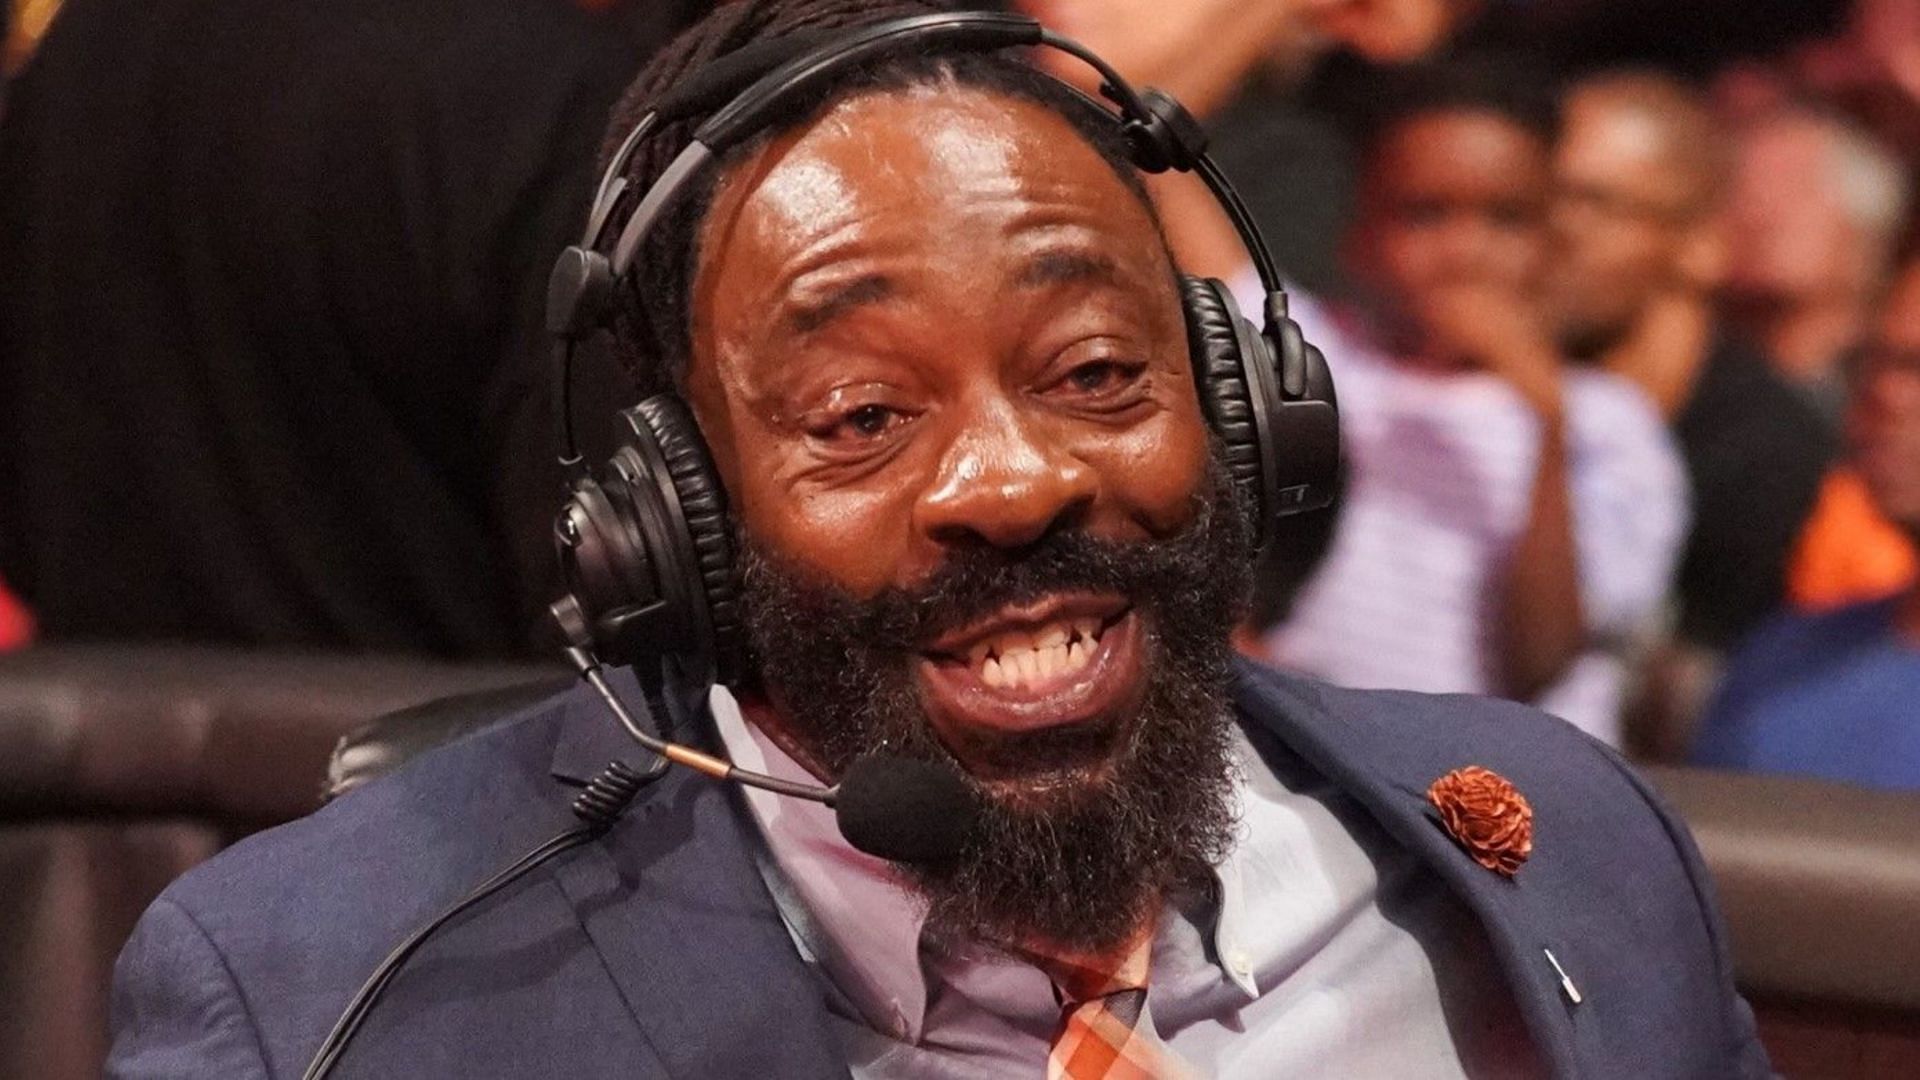 WWE Hall of Famer Booker T is now a full-time color commentator on NXT